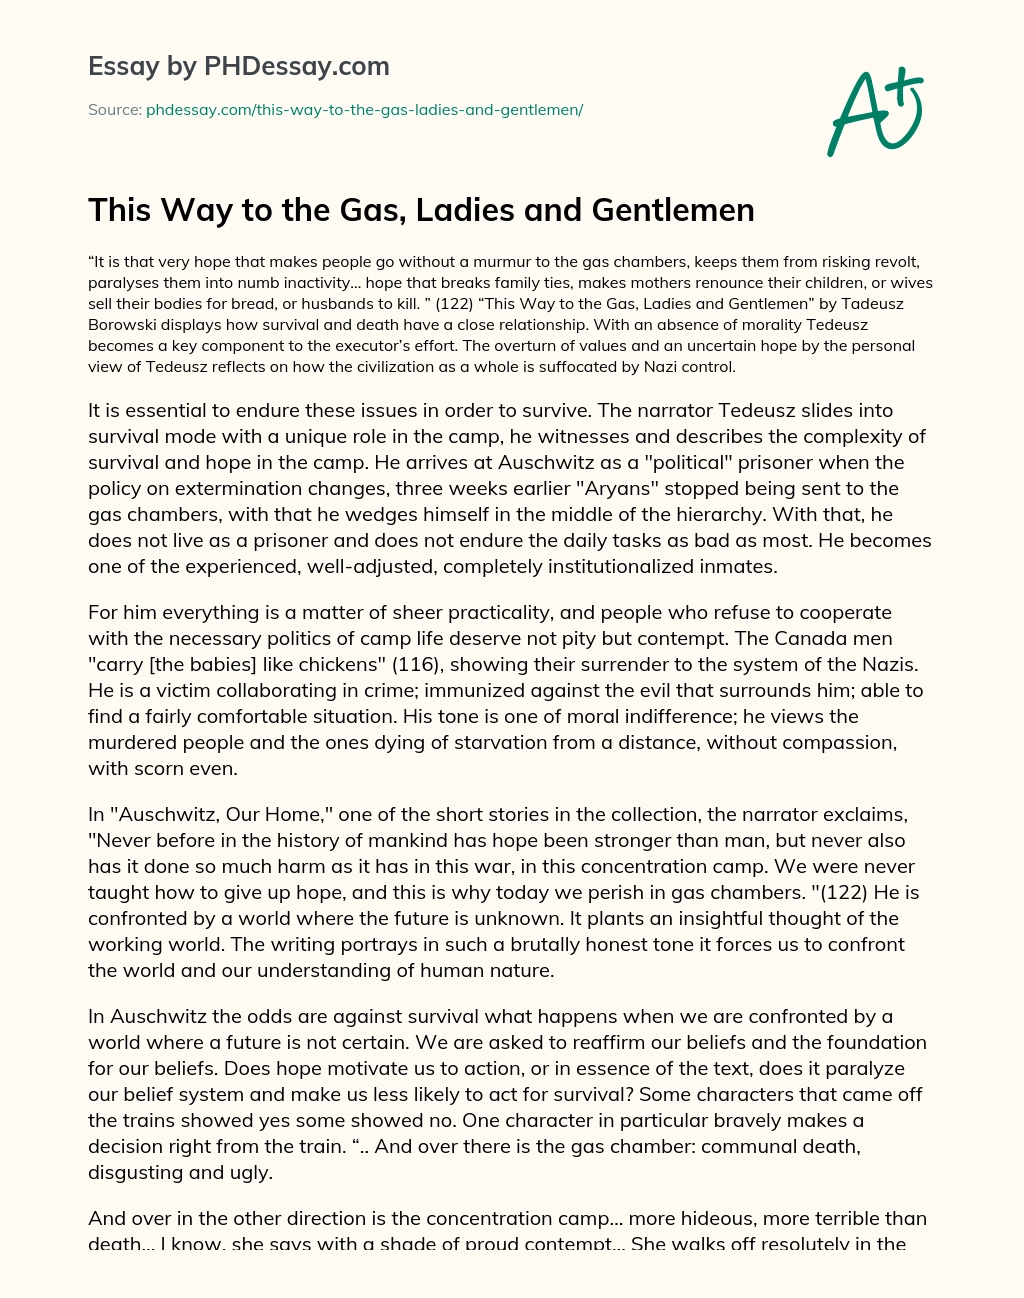 This Way to the Gas, Ladies and Gentlemen essay